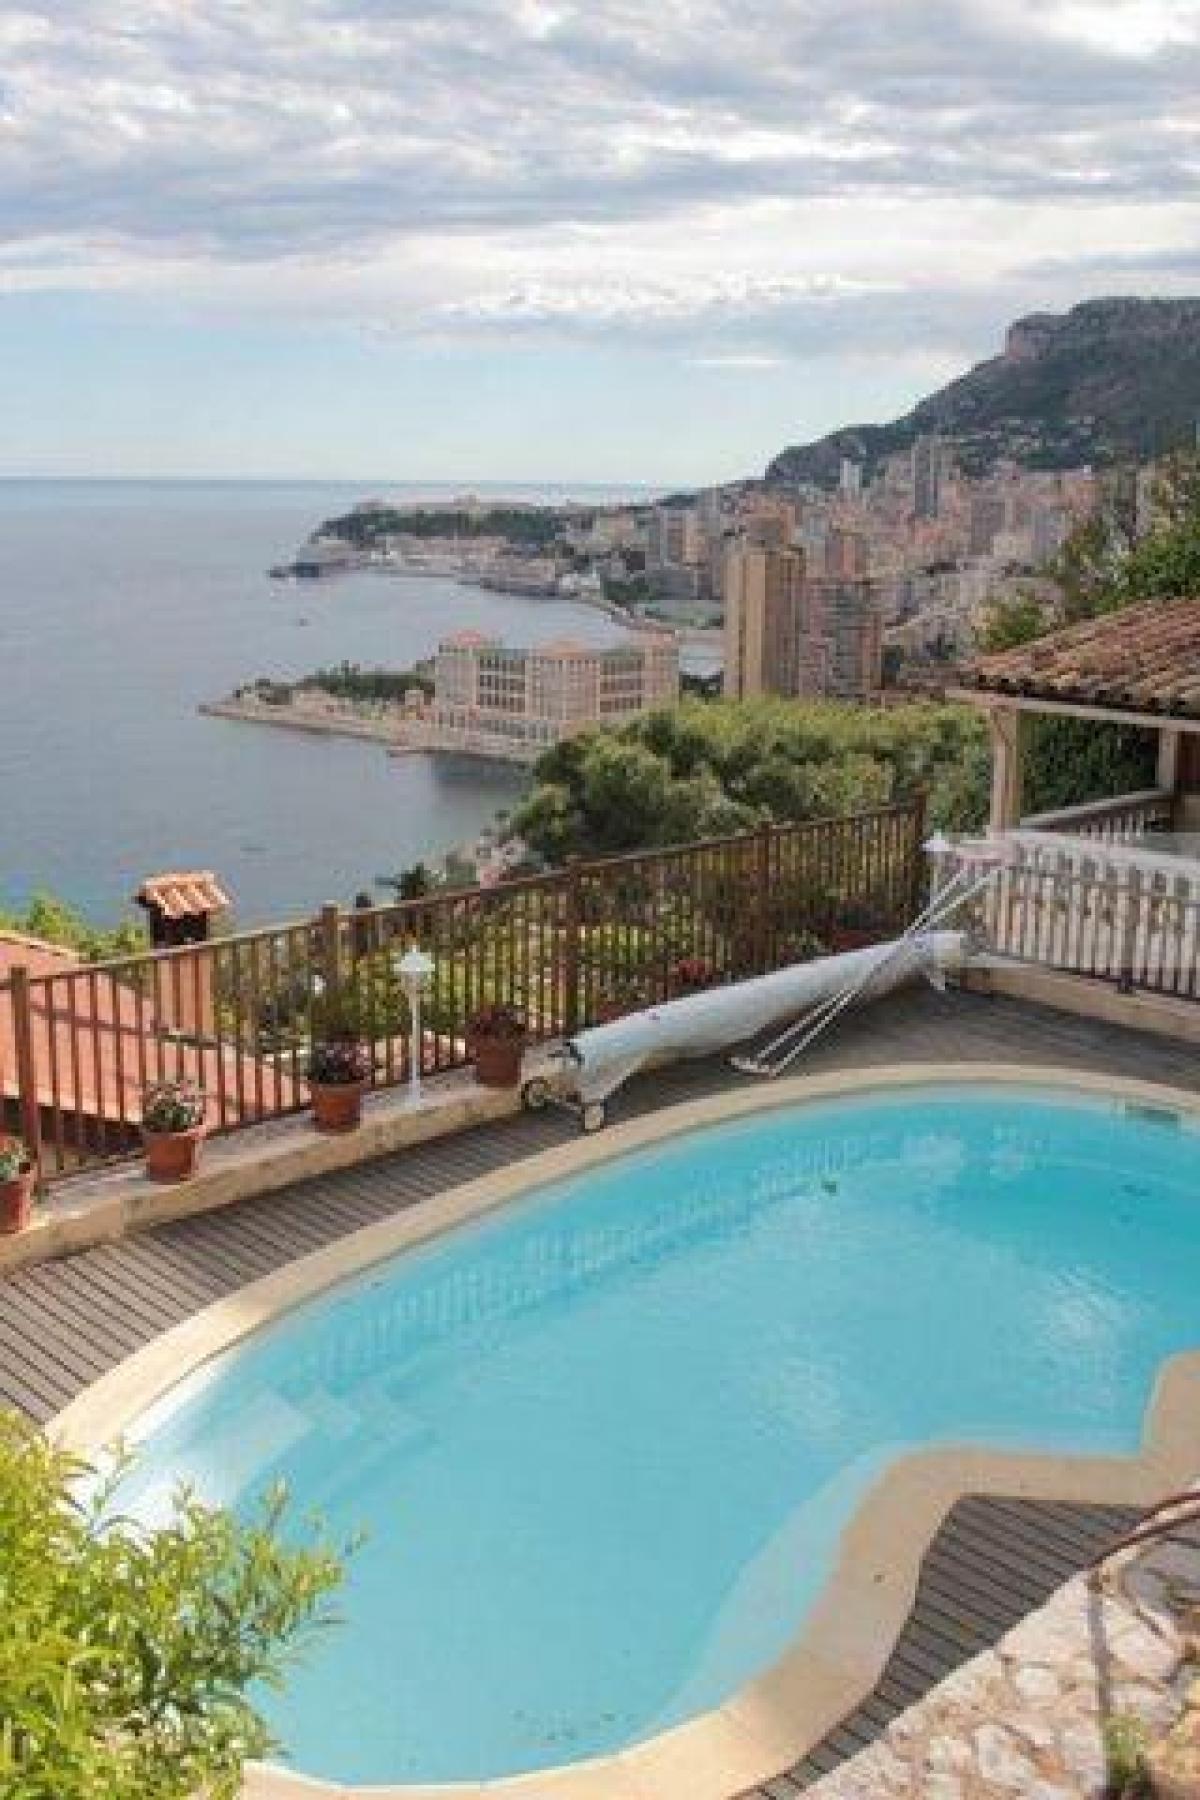 Picture of Home For Sale in ROQUEBRUNE CAP MARTIN, Cote d'Azur, France